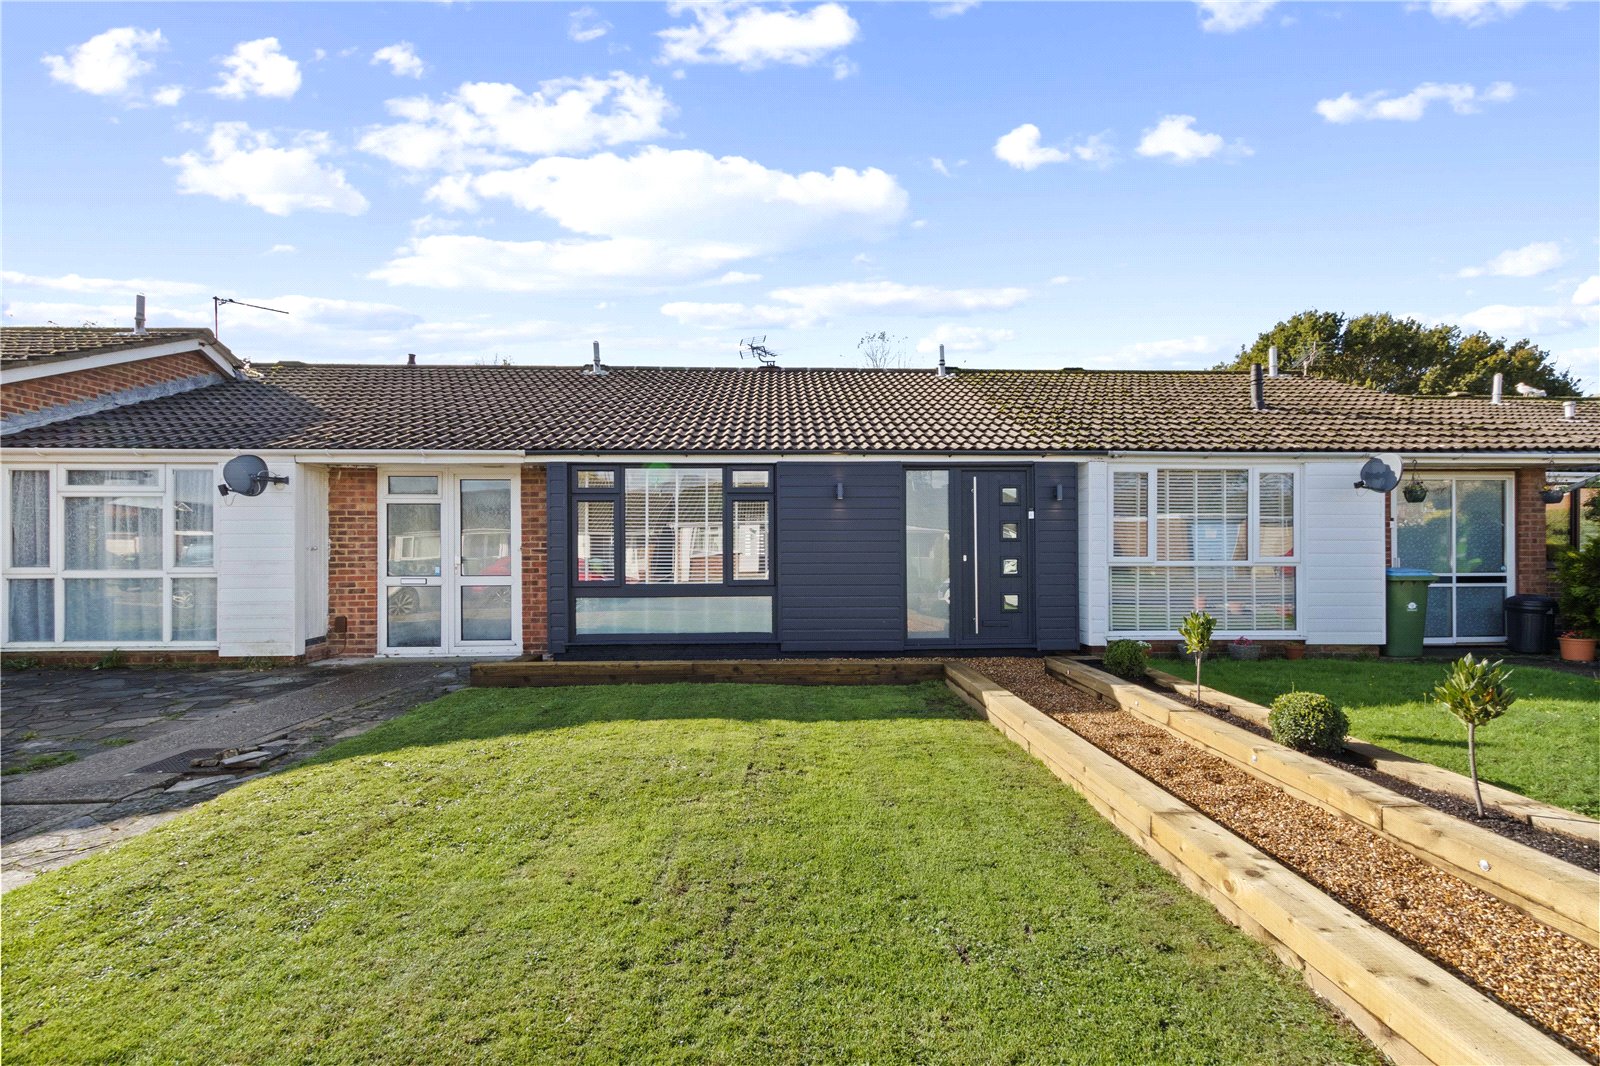 2 bed bungalow for sale in Markfield, North Bersted - Property Image 1